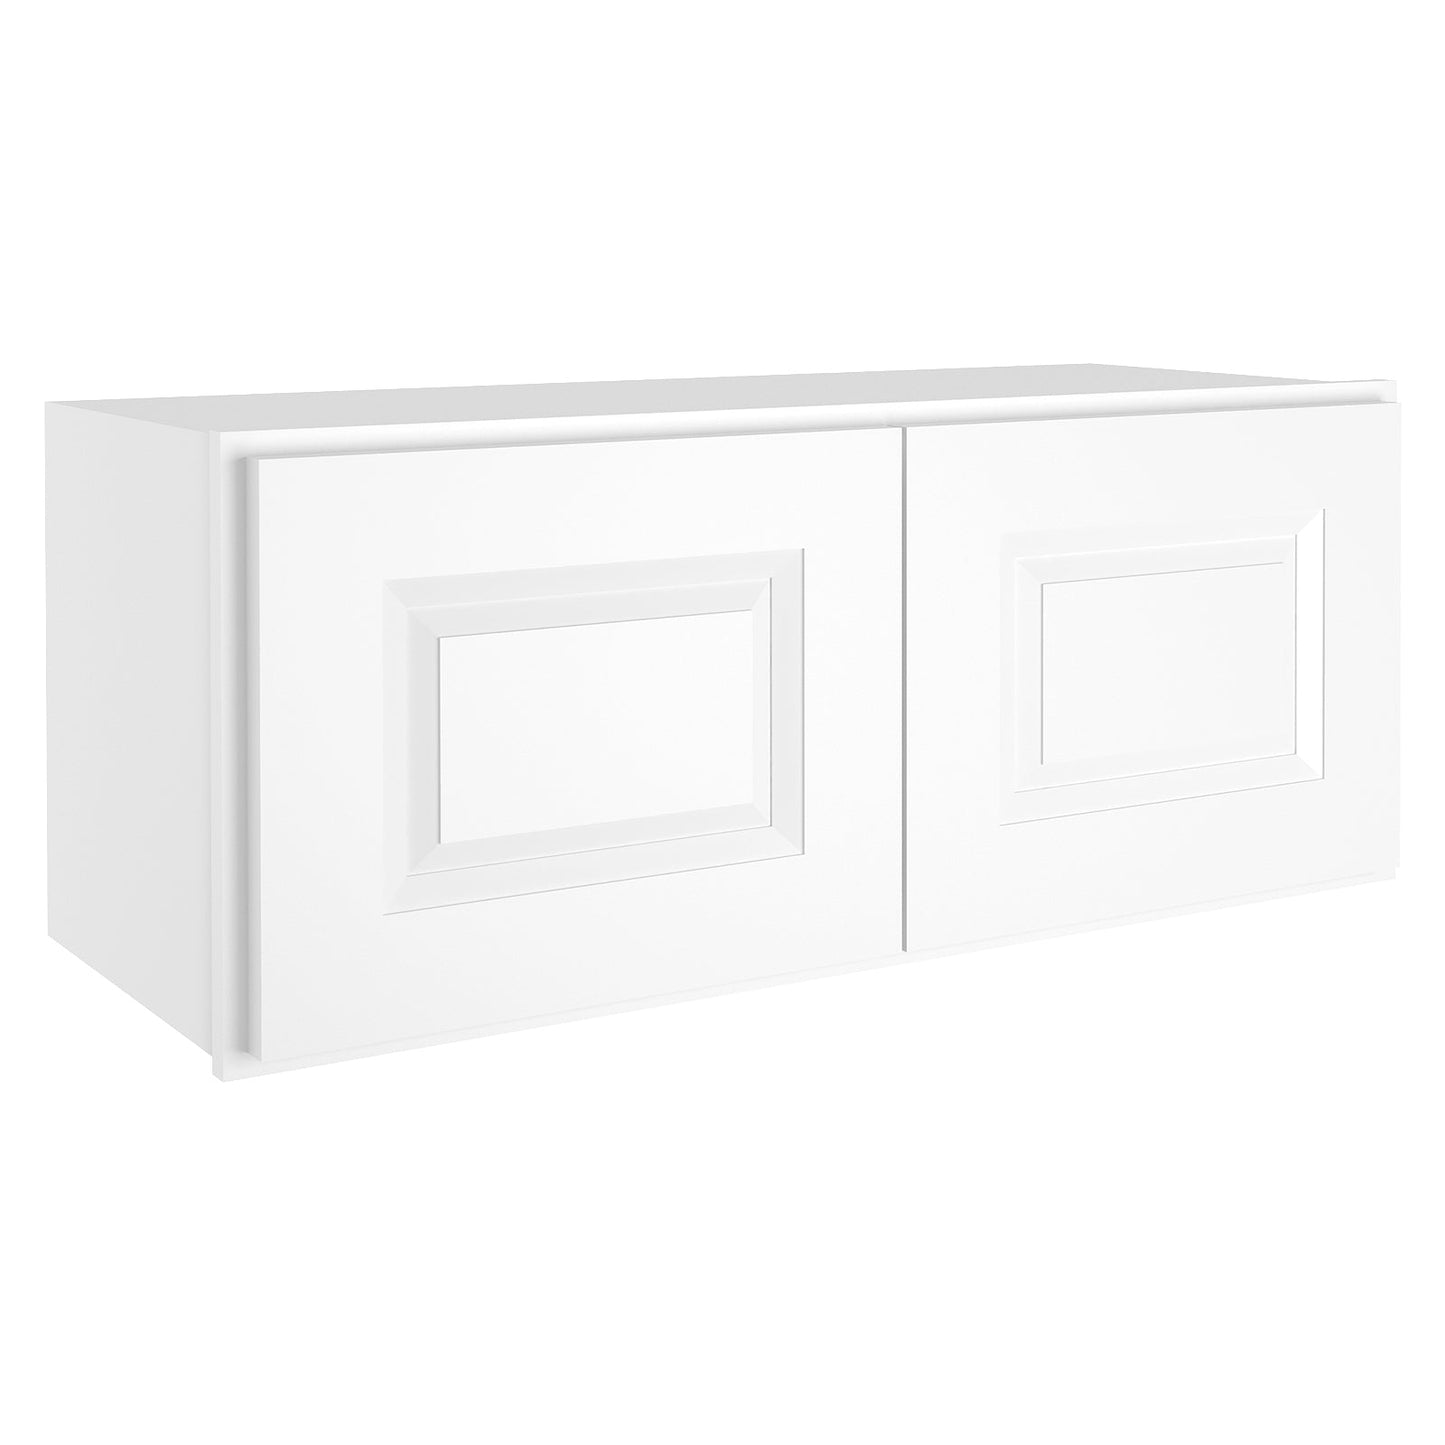 Medicine Cabinet Wall Mounted W3012